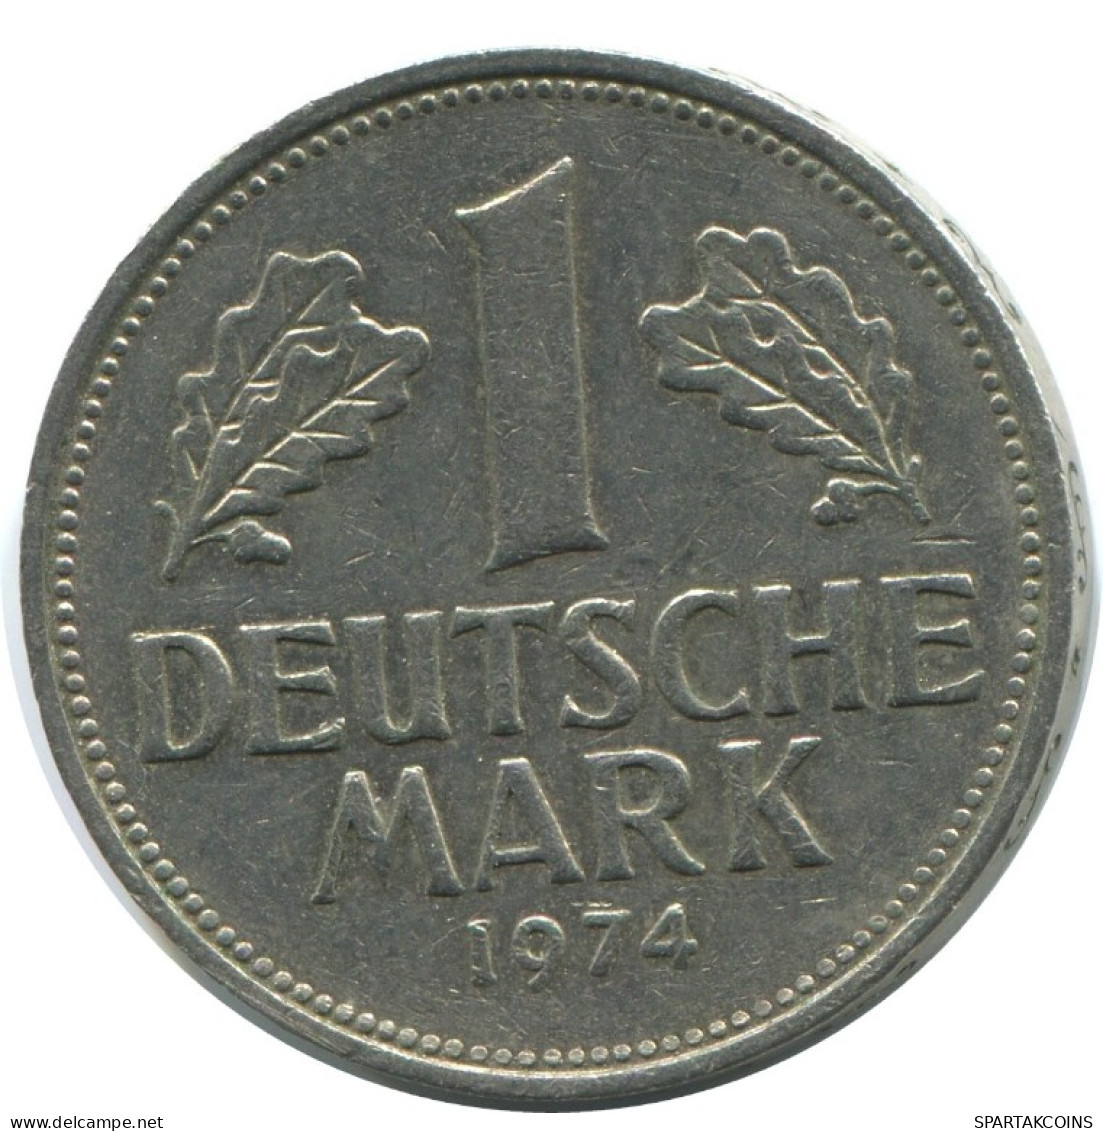 1 DM 1974 J WEST & UNIFIED GERMANY Coin #AG323.3.U.A - 1 Marco